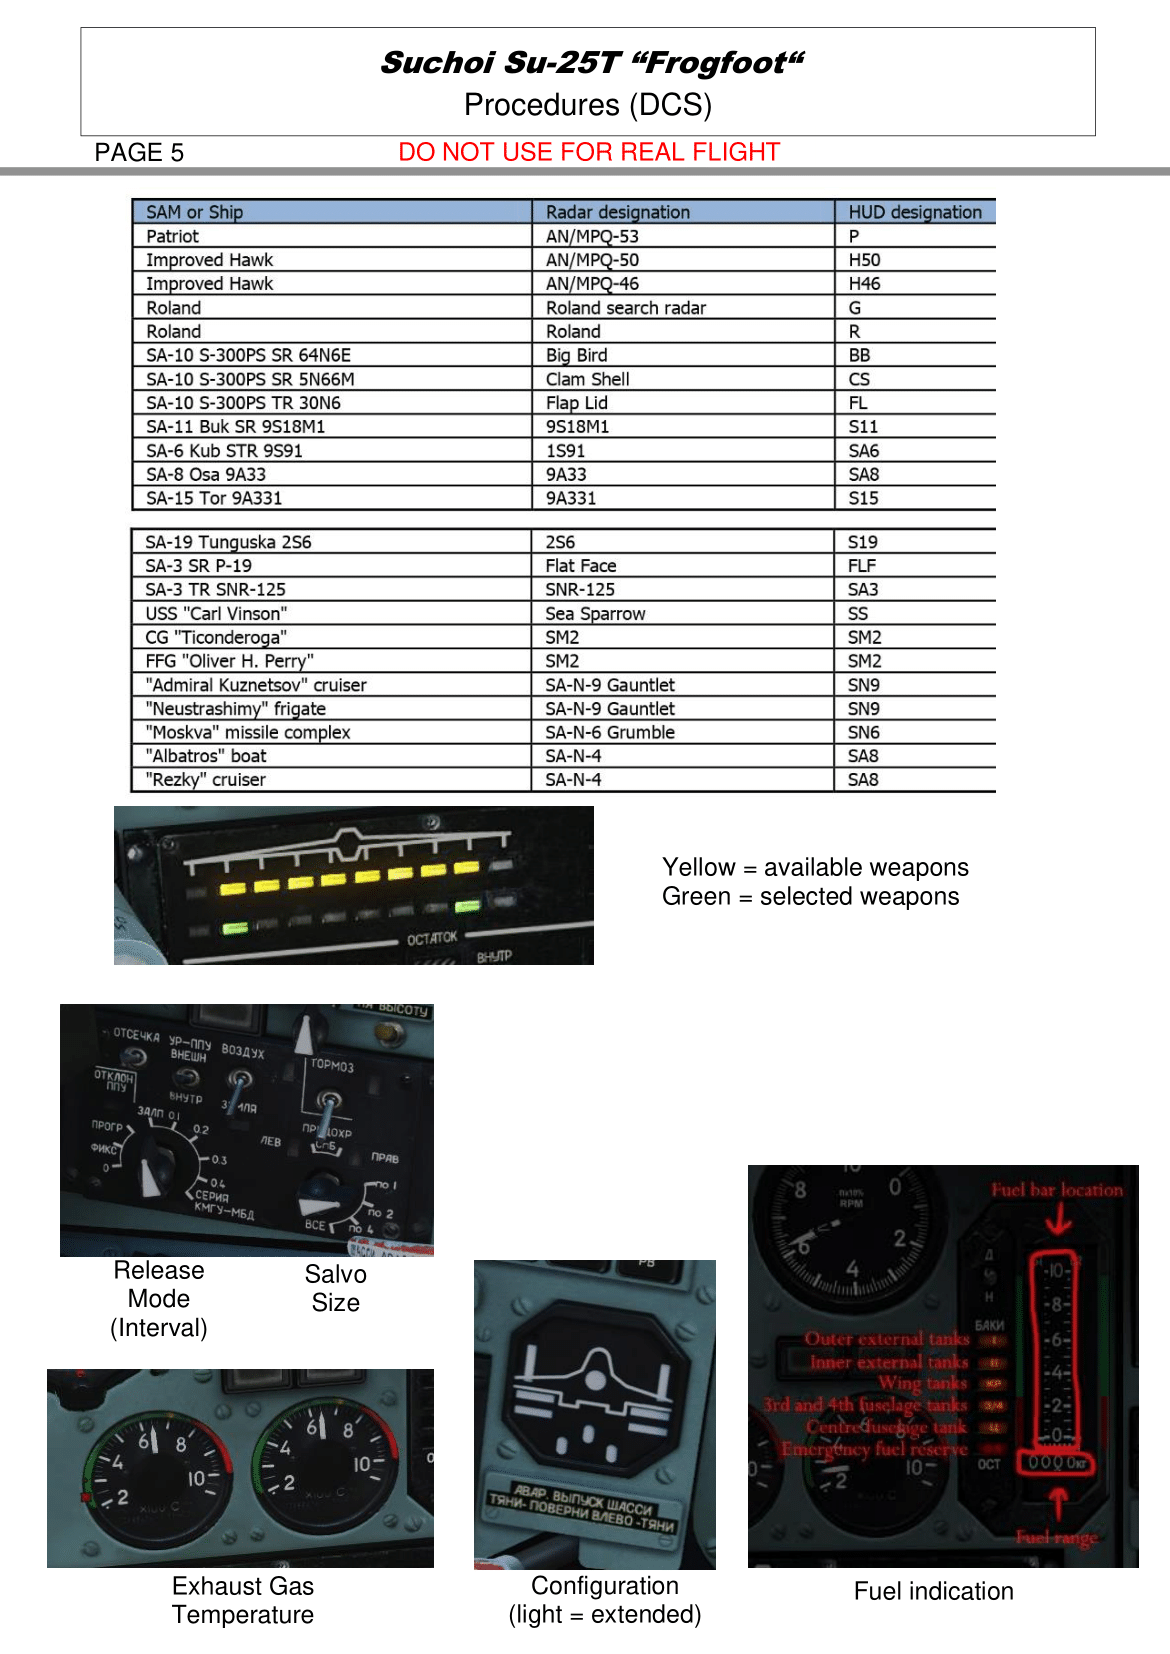 DCS SU-25T Flying Guide image 6